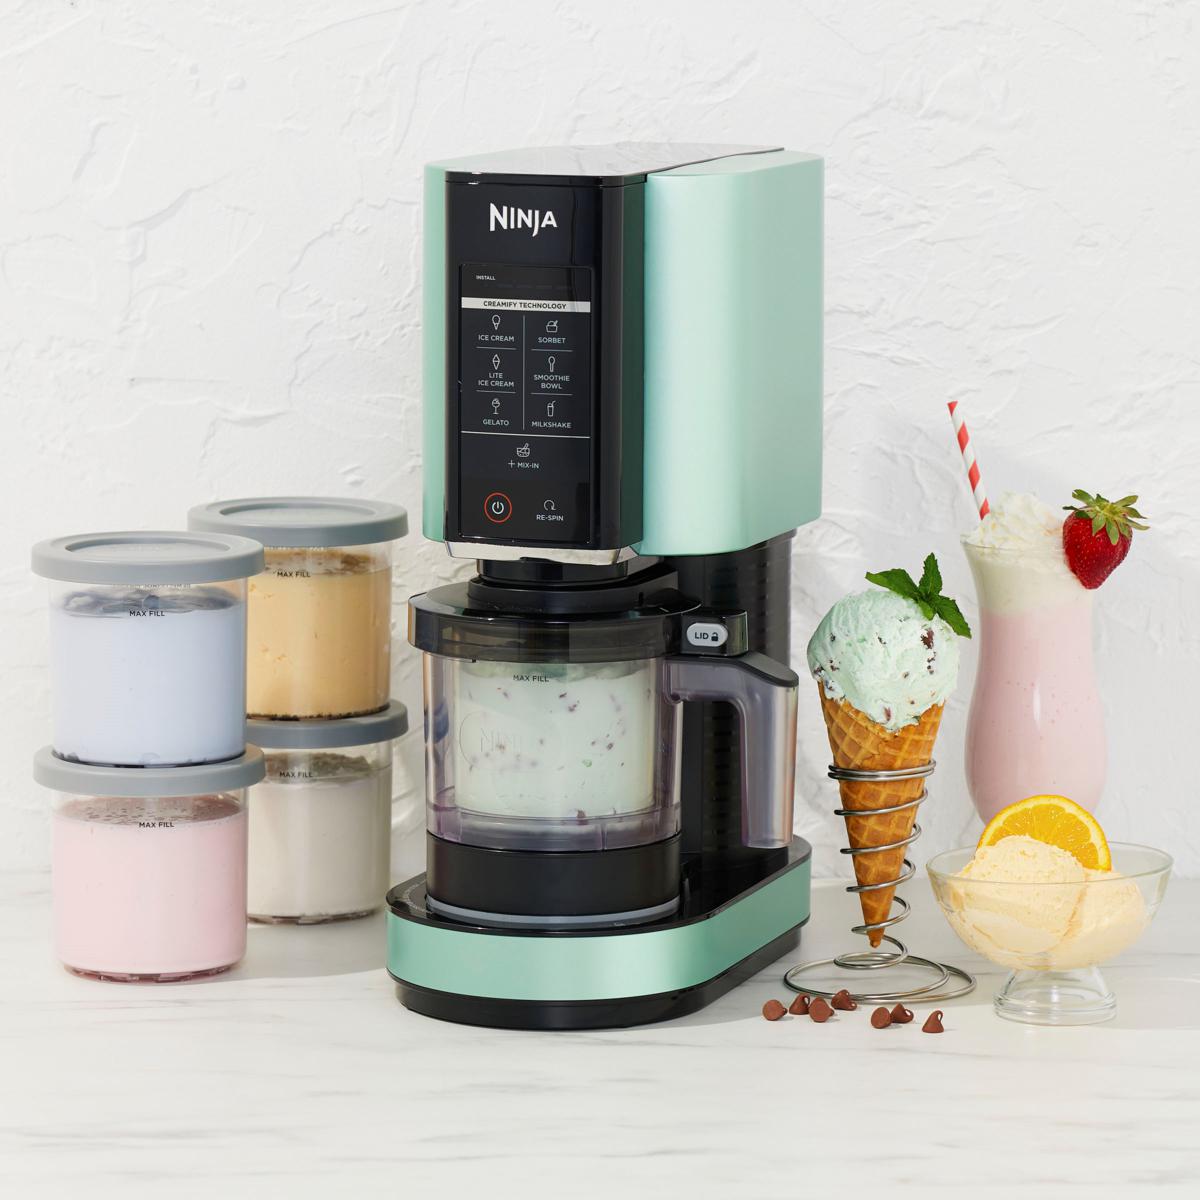 Ninja CREAMi 7-in-1 Frozen Treat Maker w/ Extra Pint Containers (Various Colors) $150 + Free Shipping